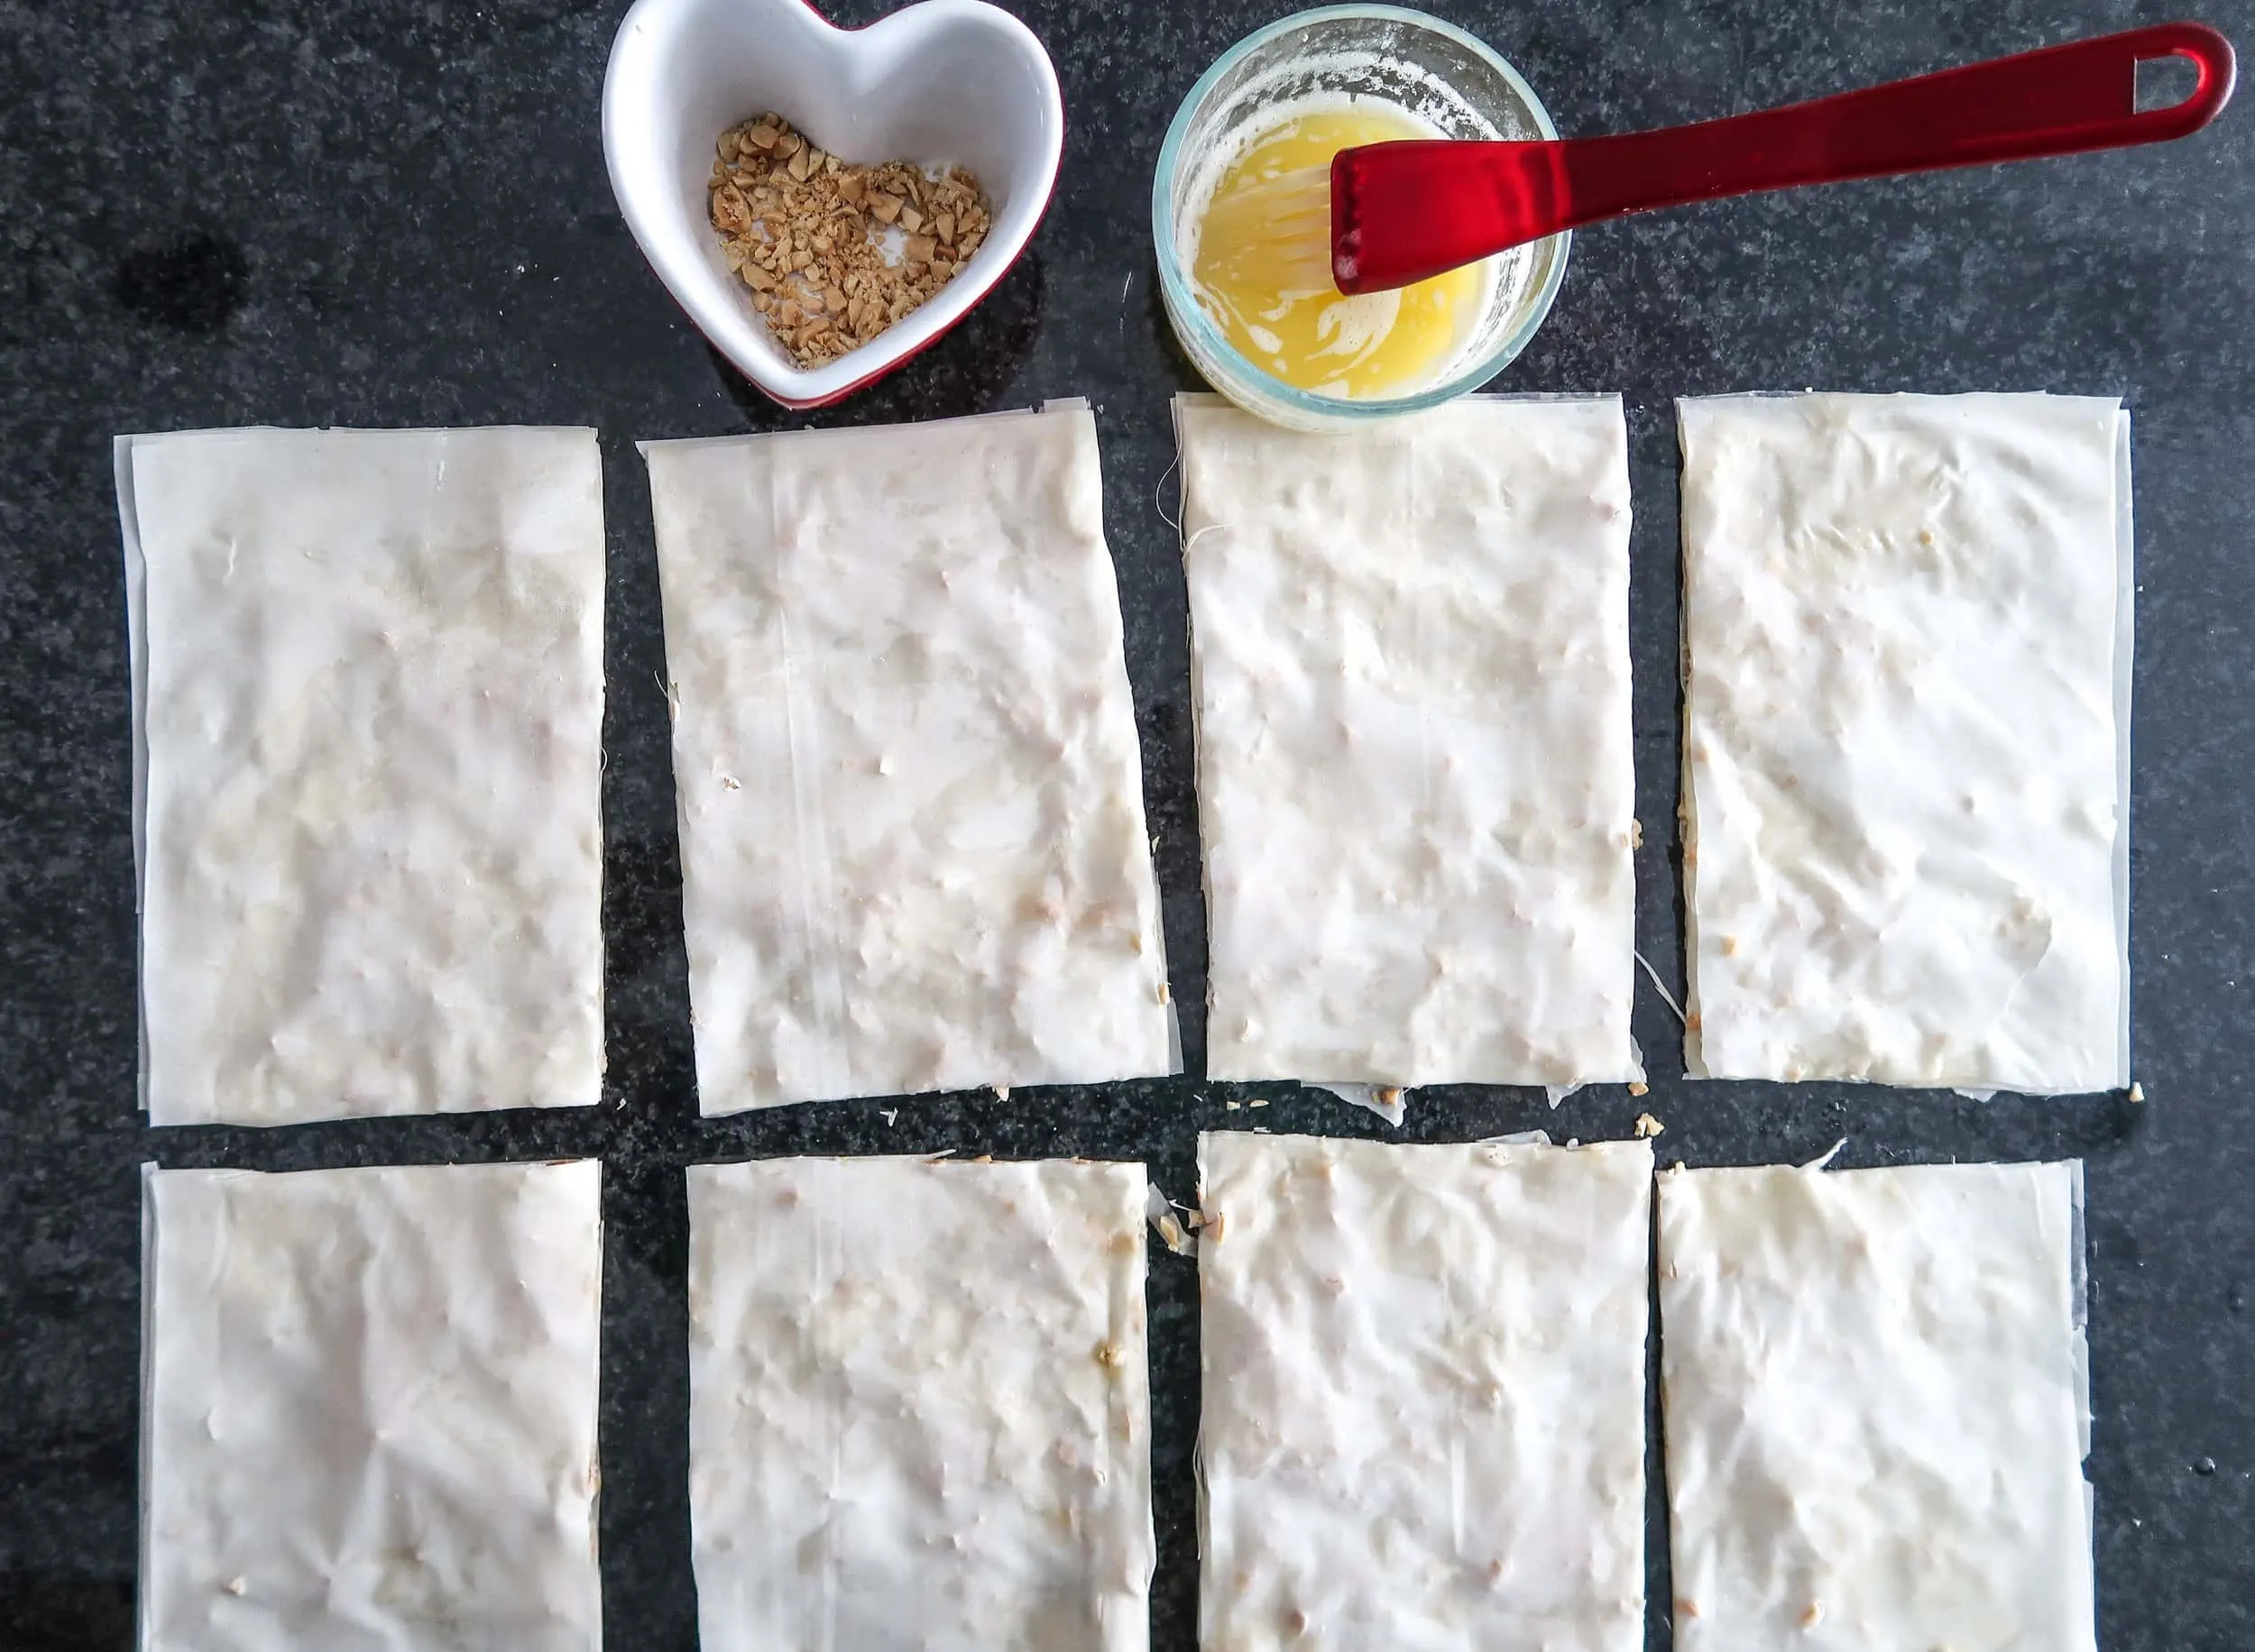 Rectangles of phyllo dough.